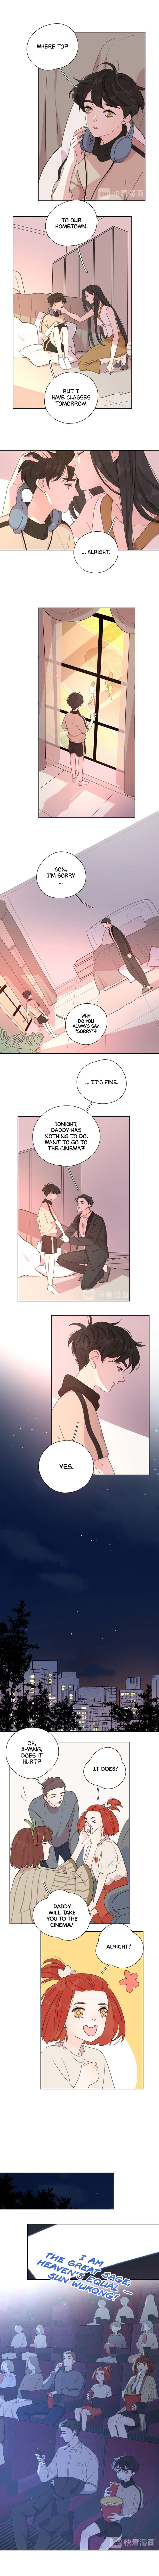 The Looks Of Love: The Heart Has Its Reasons - Page 4